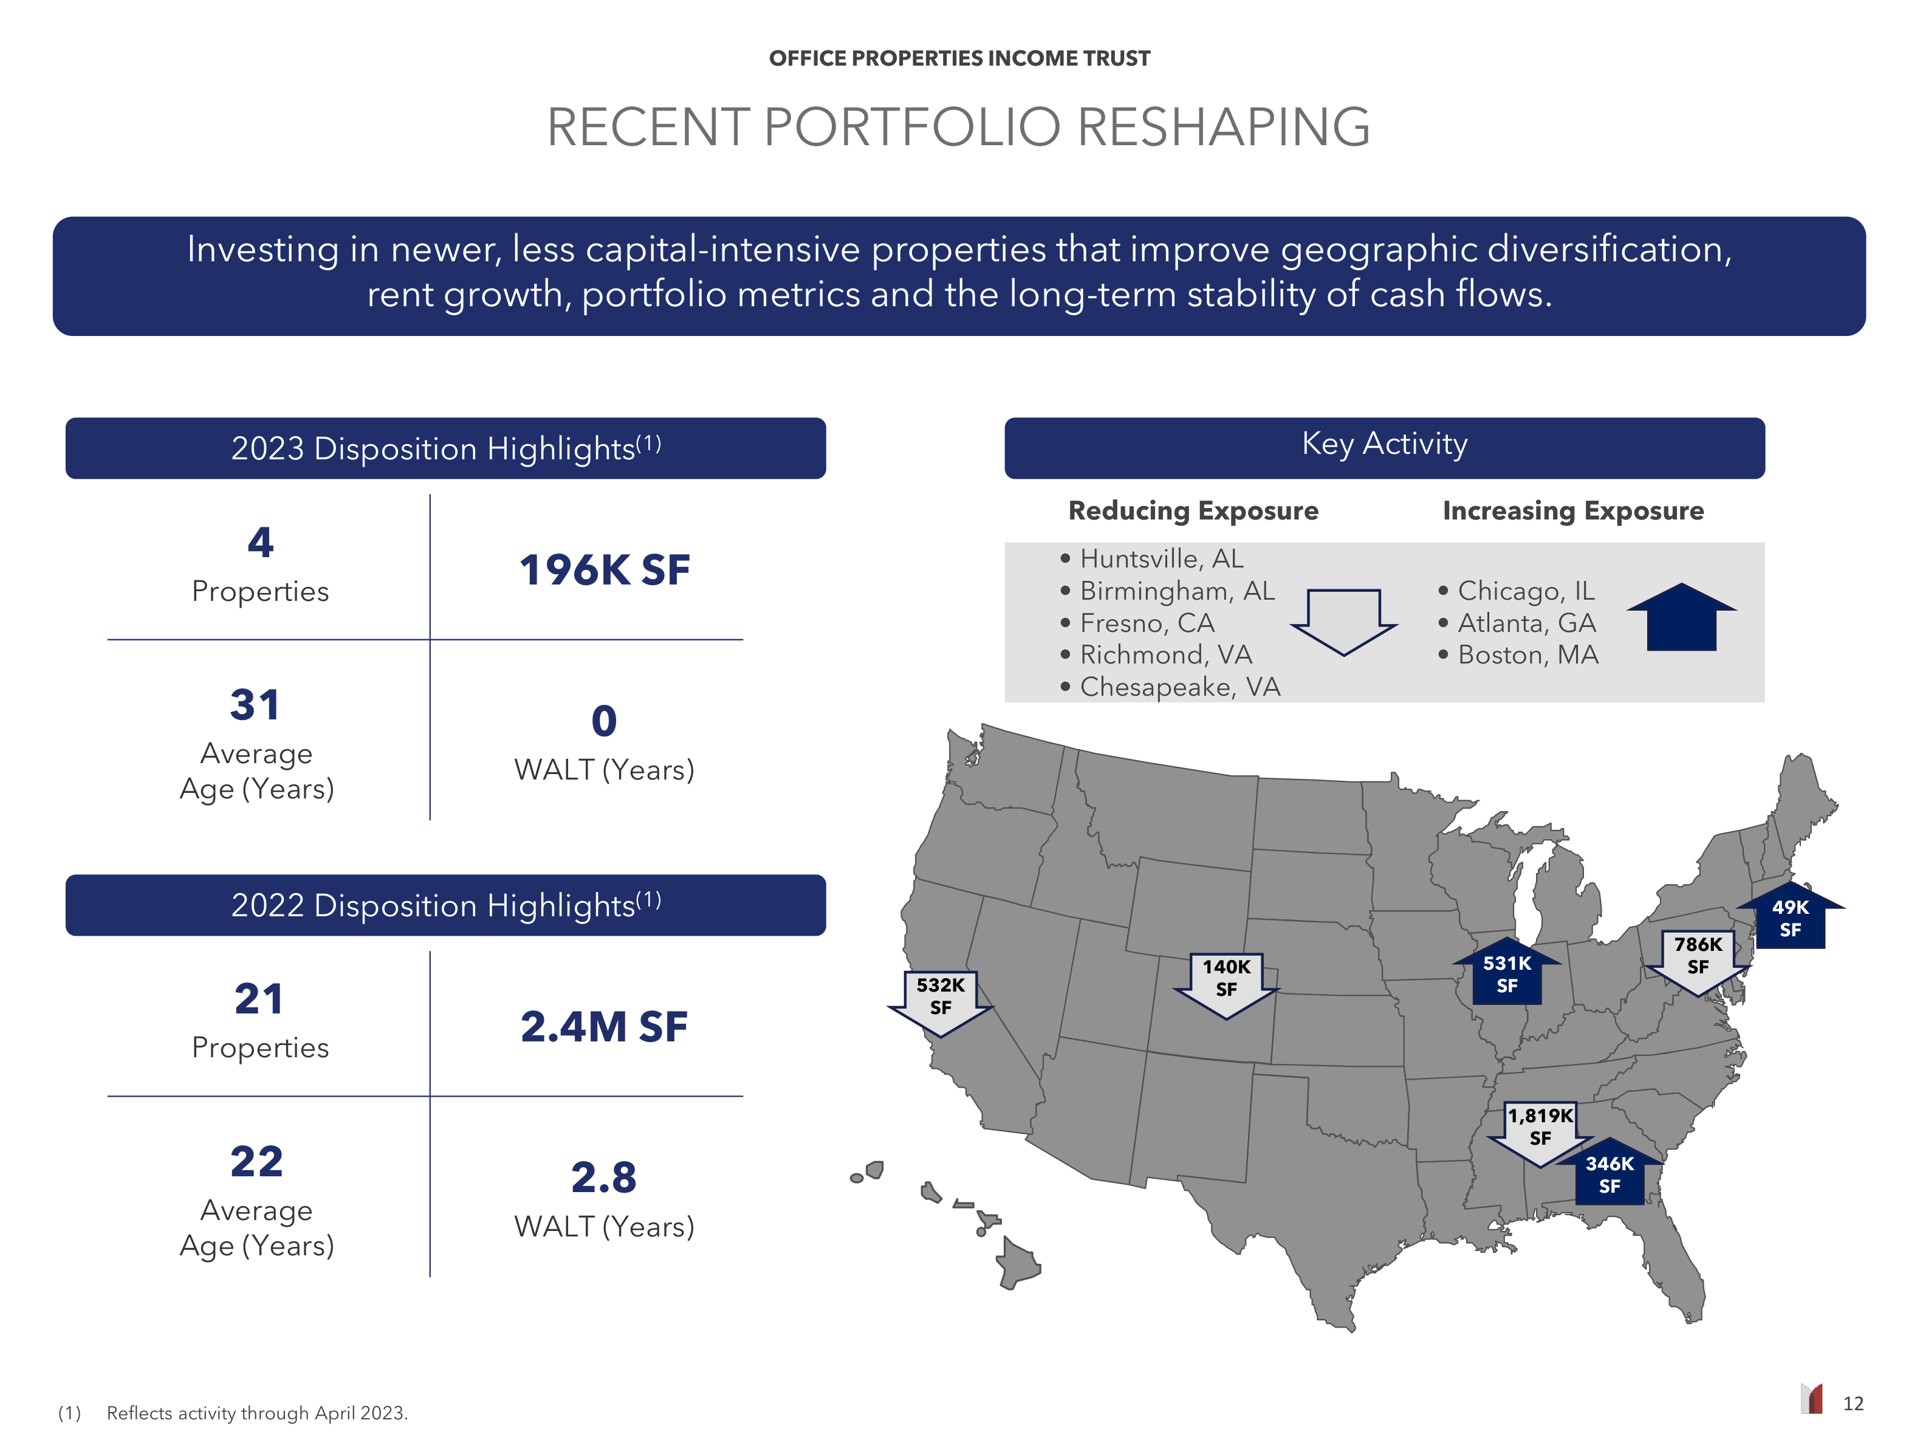 recent portfolio reshaping investing in less capital intensive properties that improve geographic diversification rent growth portfolio metrics and the long term stability of cash flows | Office Properties Income Trust